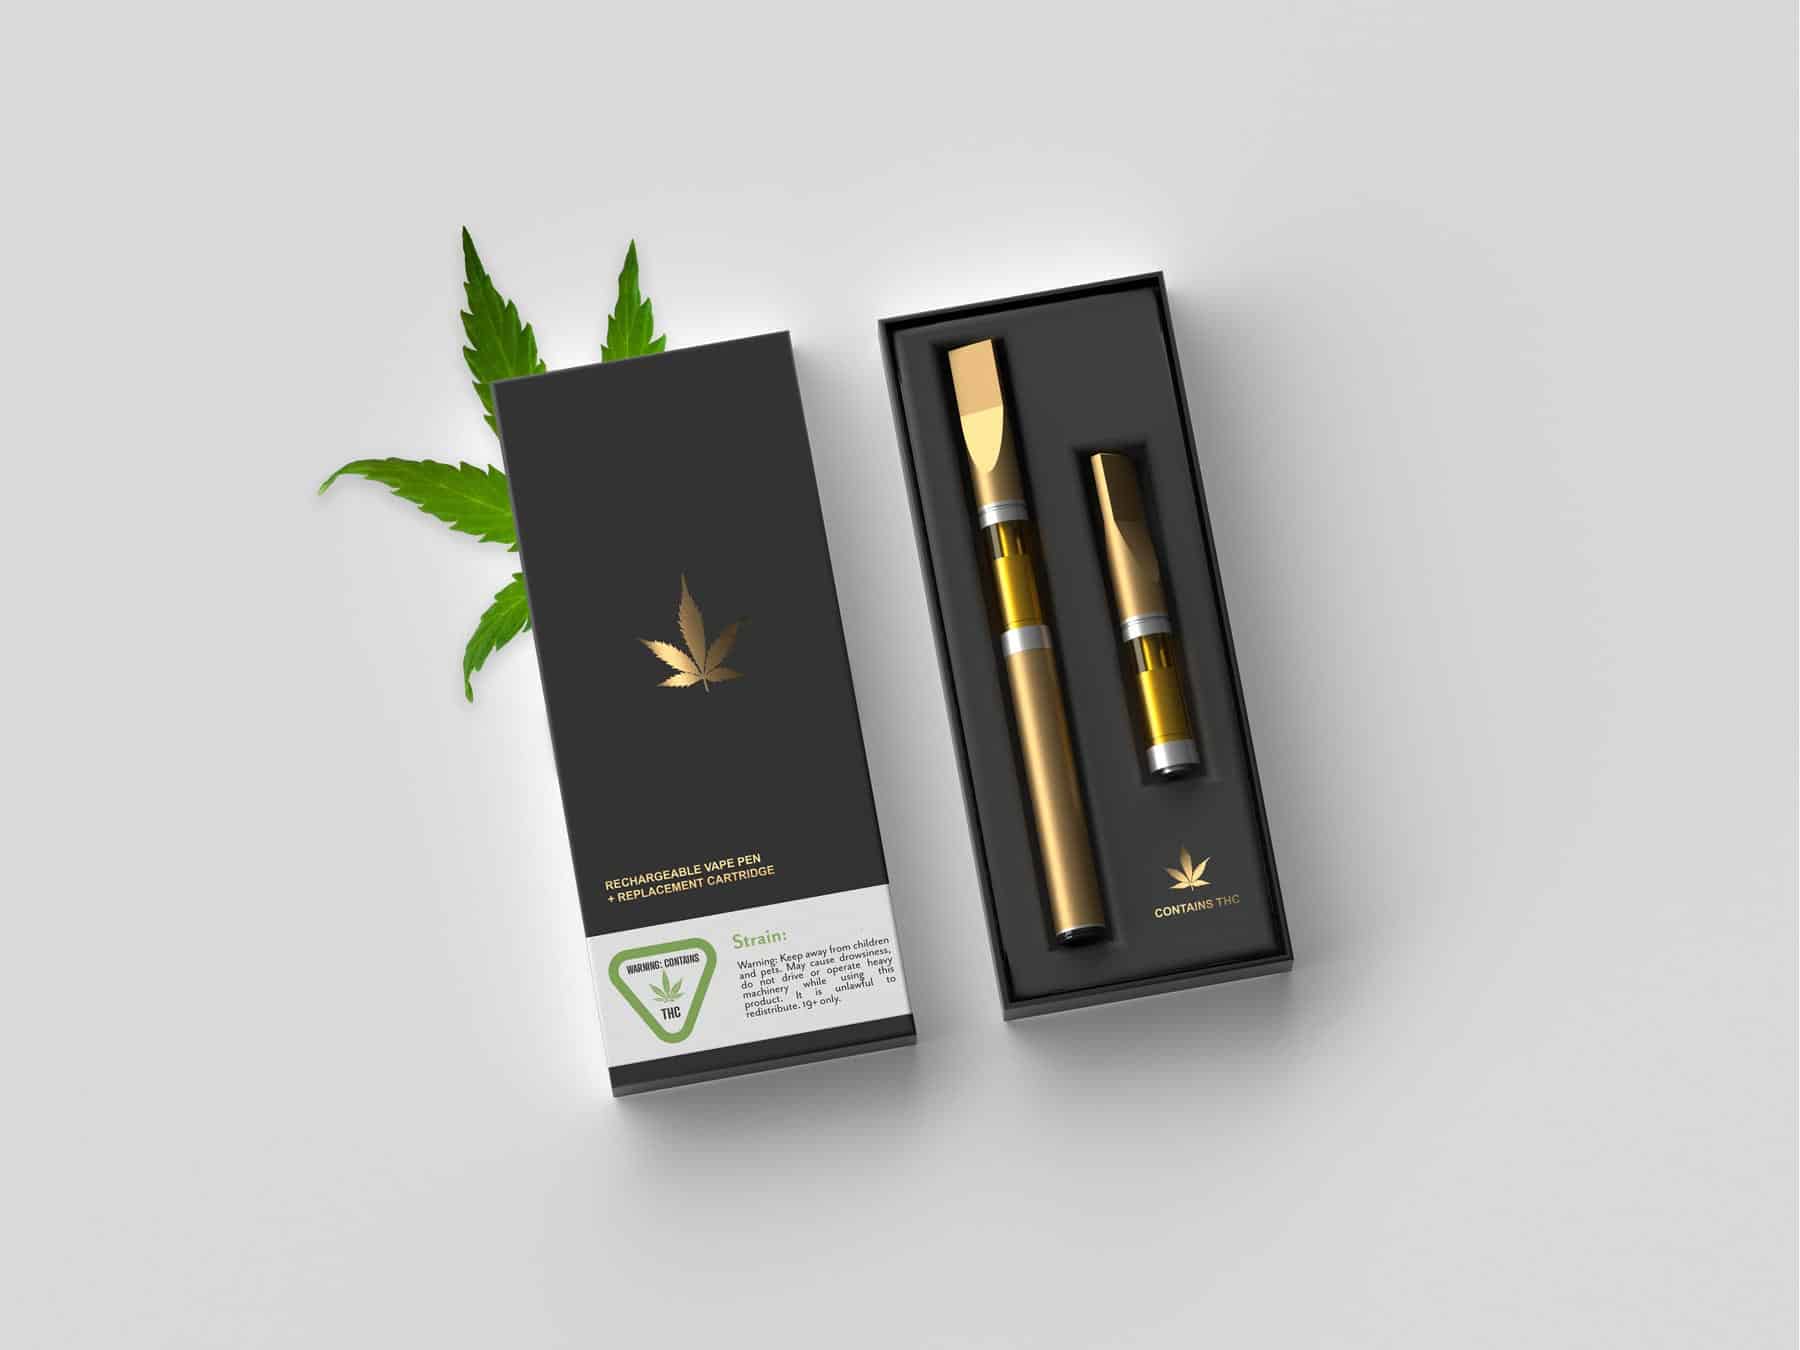 Delta 8 Vape Cartridges: A Comprehensive Review of Their Therapeutic Benefits and Risks